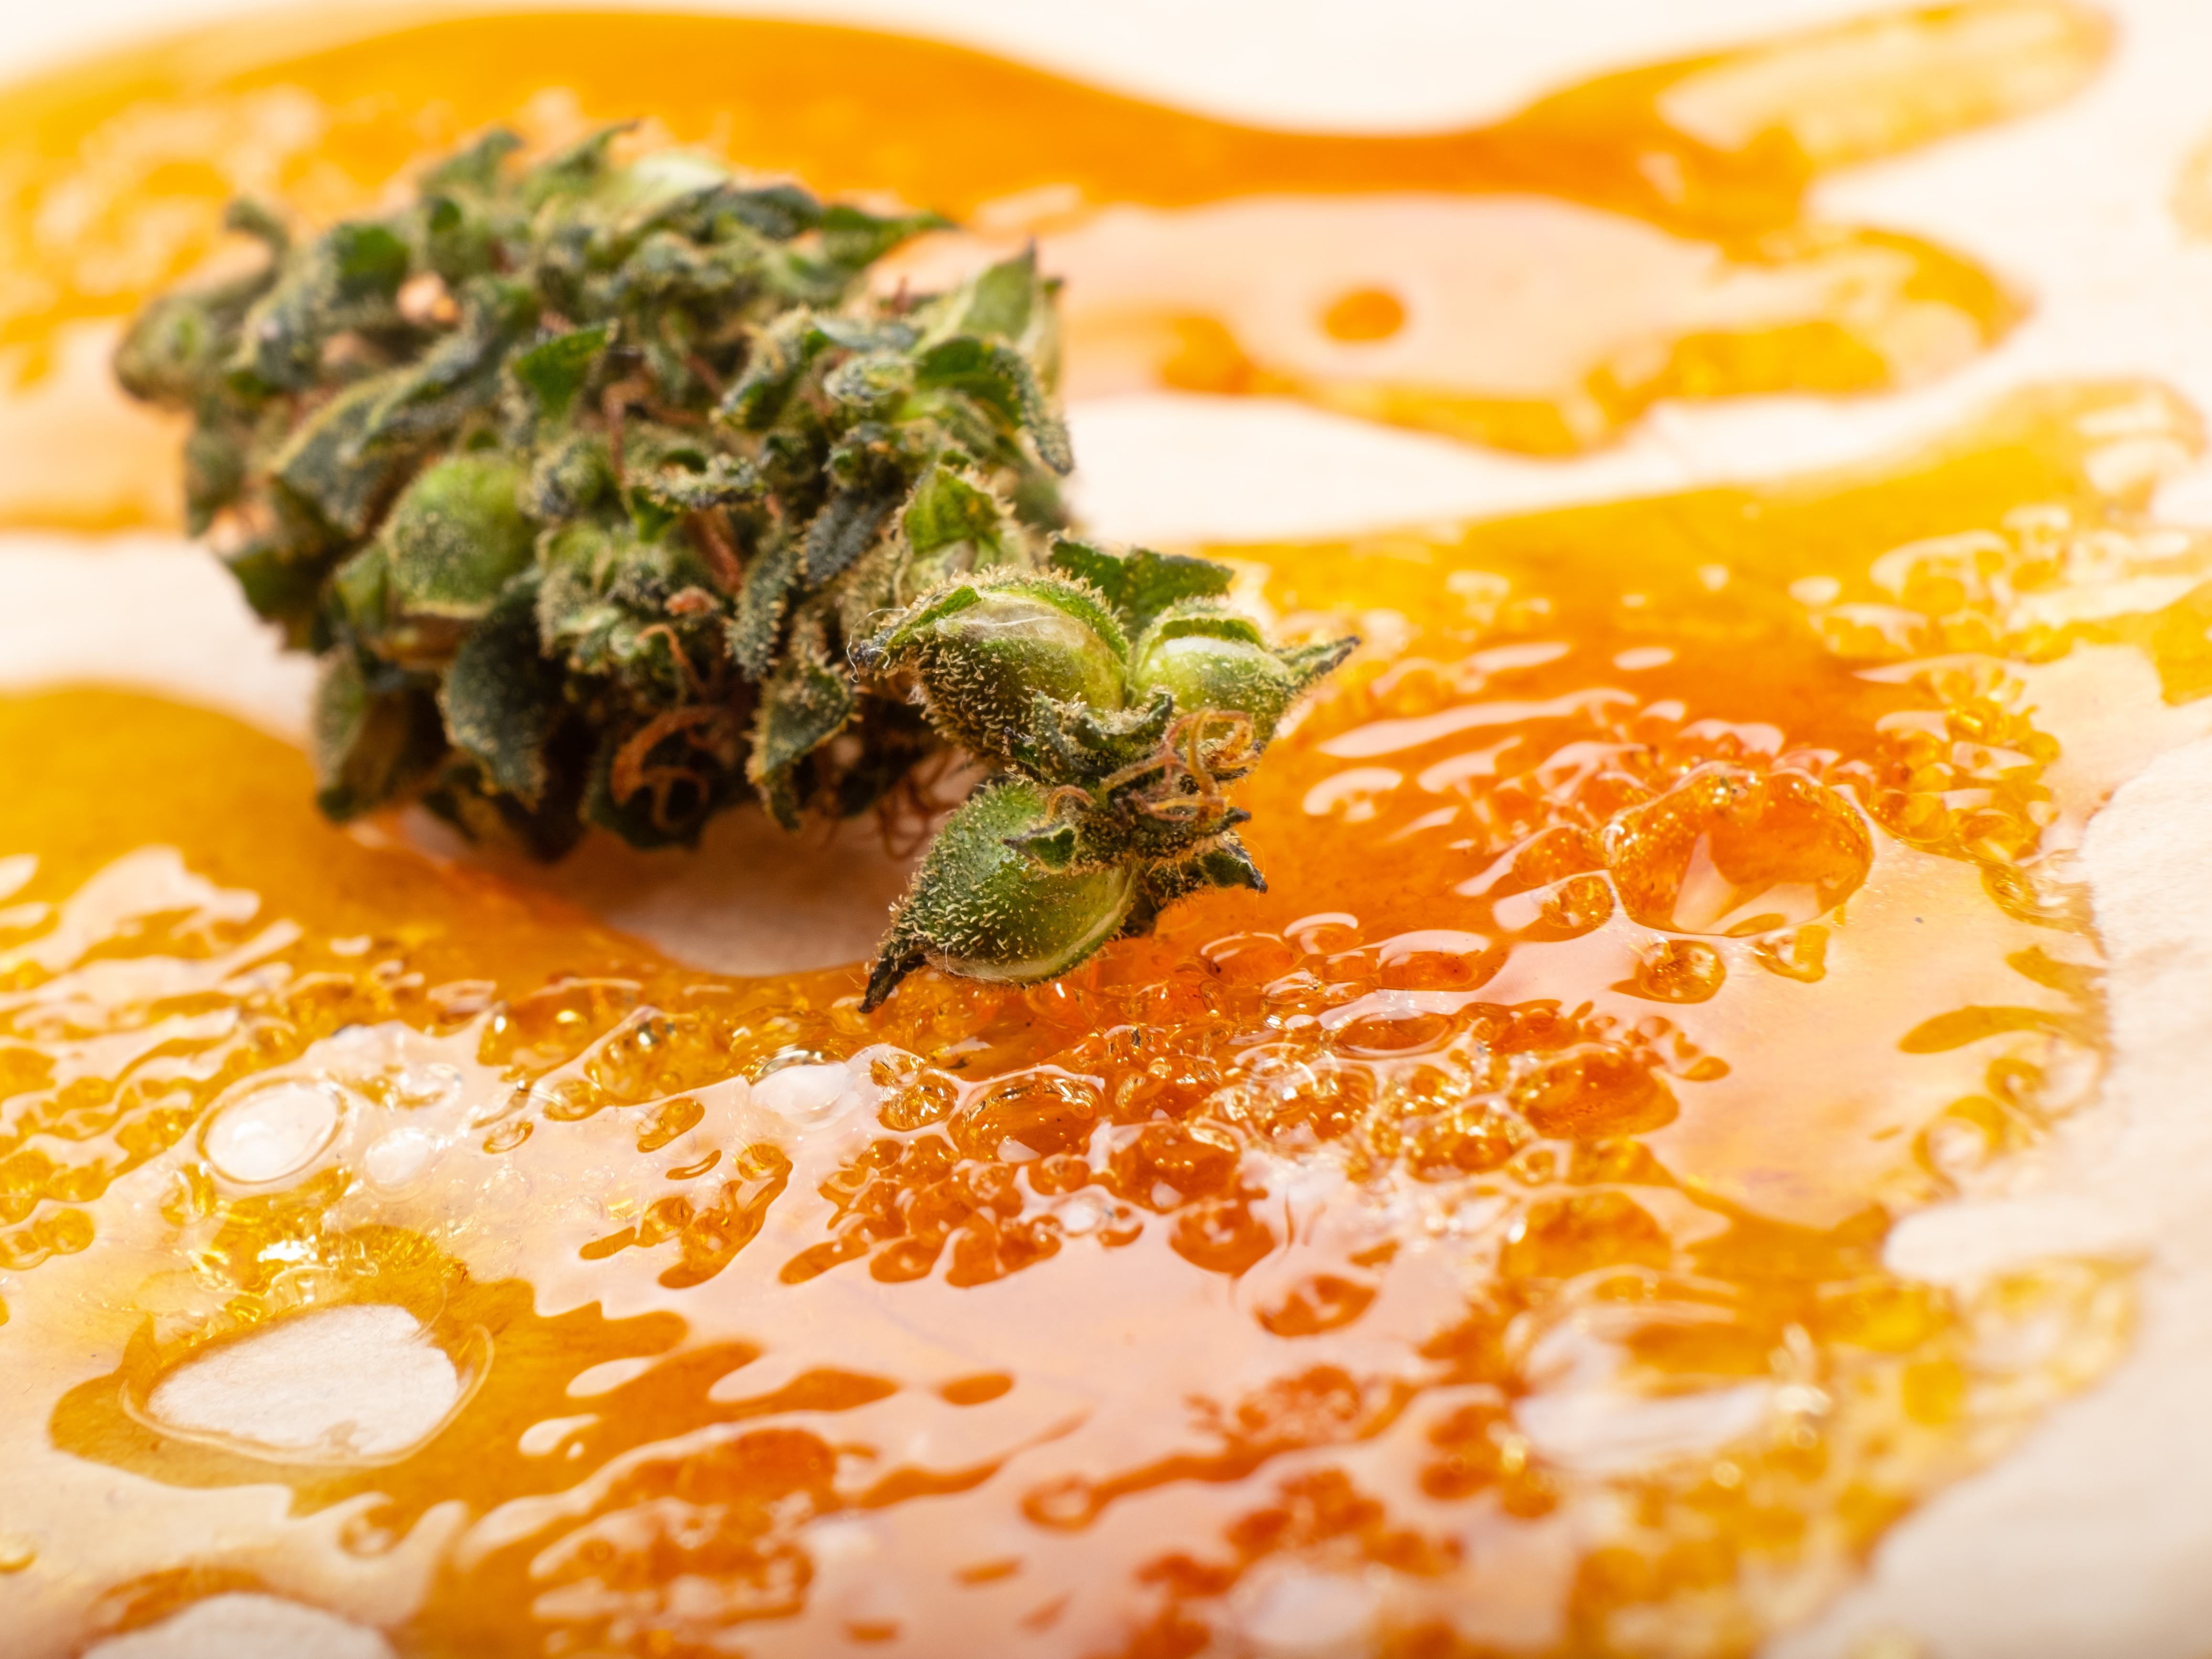 Closeup of a cannabis bud laying on top of yellow colored resin on wax paper.